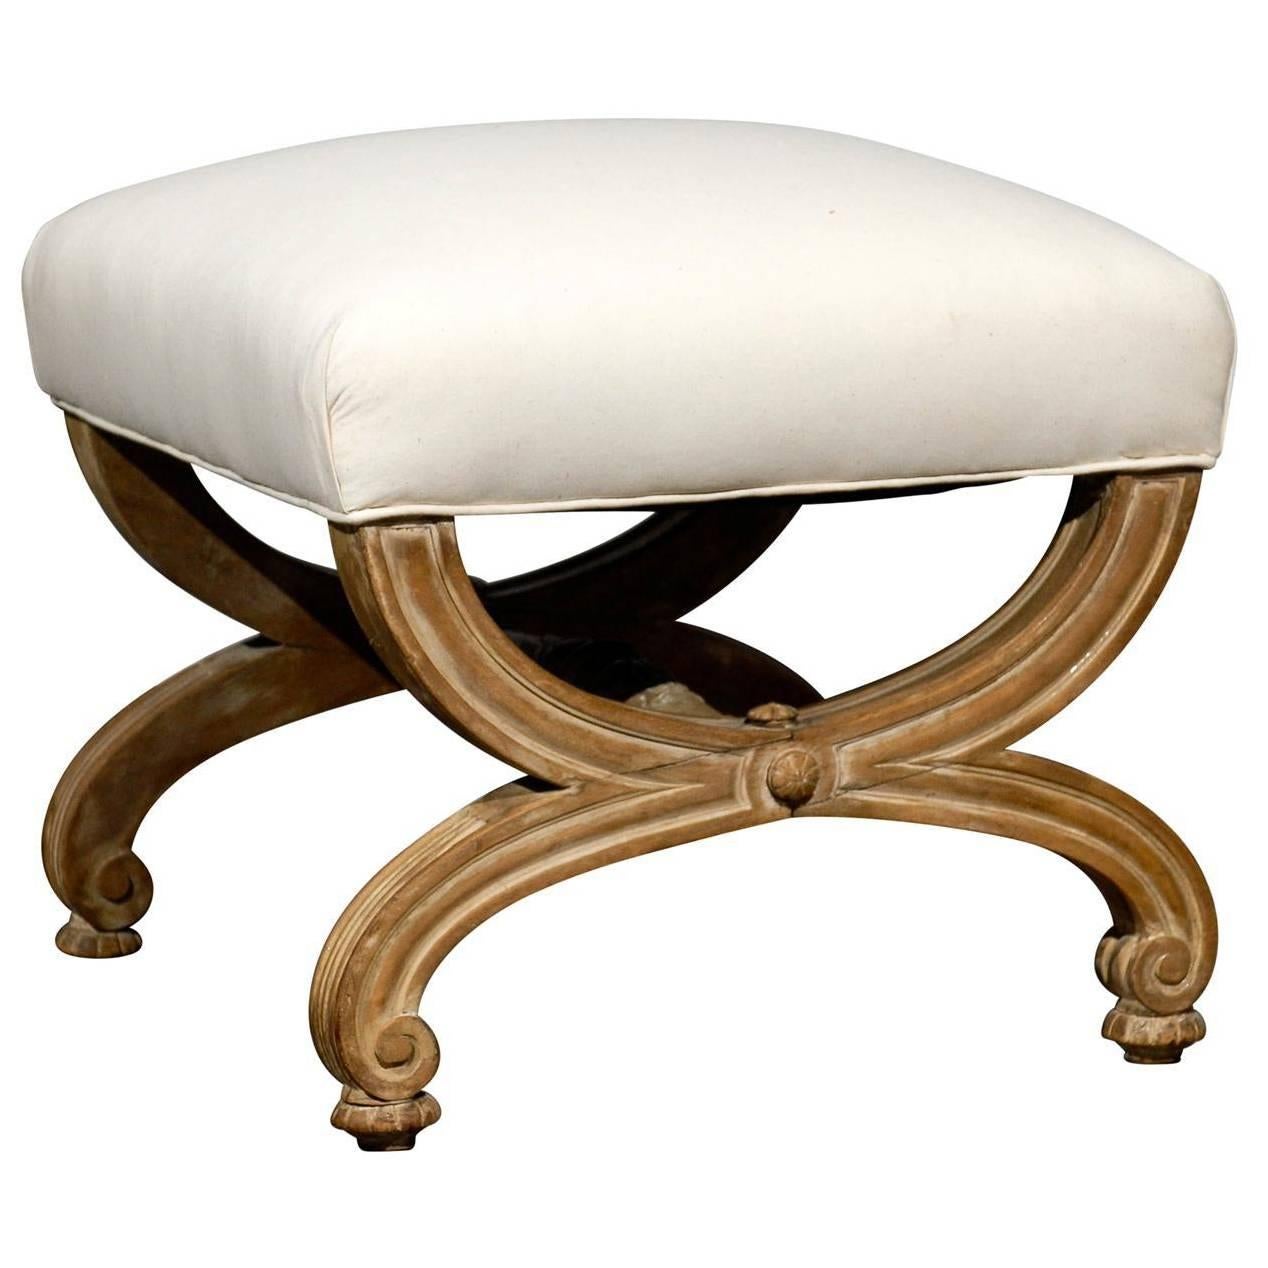 French Mid-20th Century X-Frame Stool with Upholstered Seat and Faded Wood